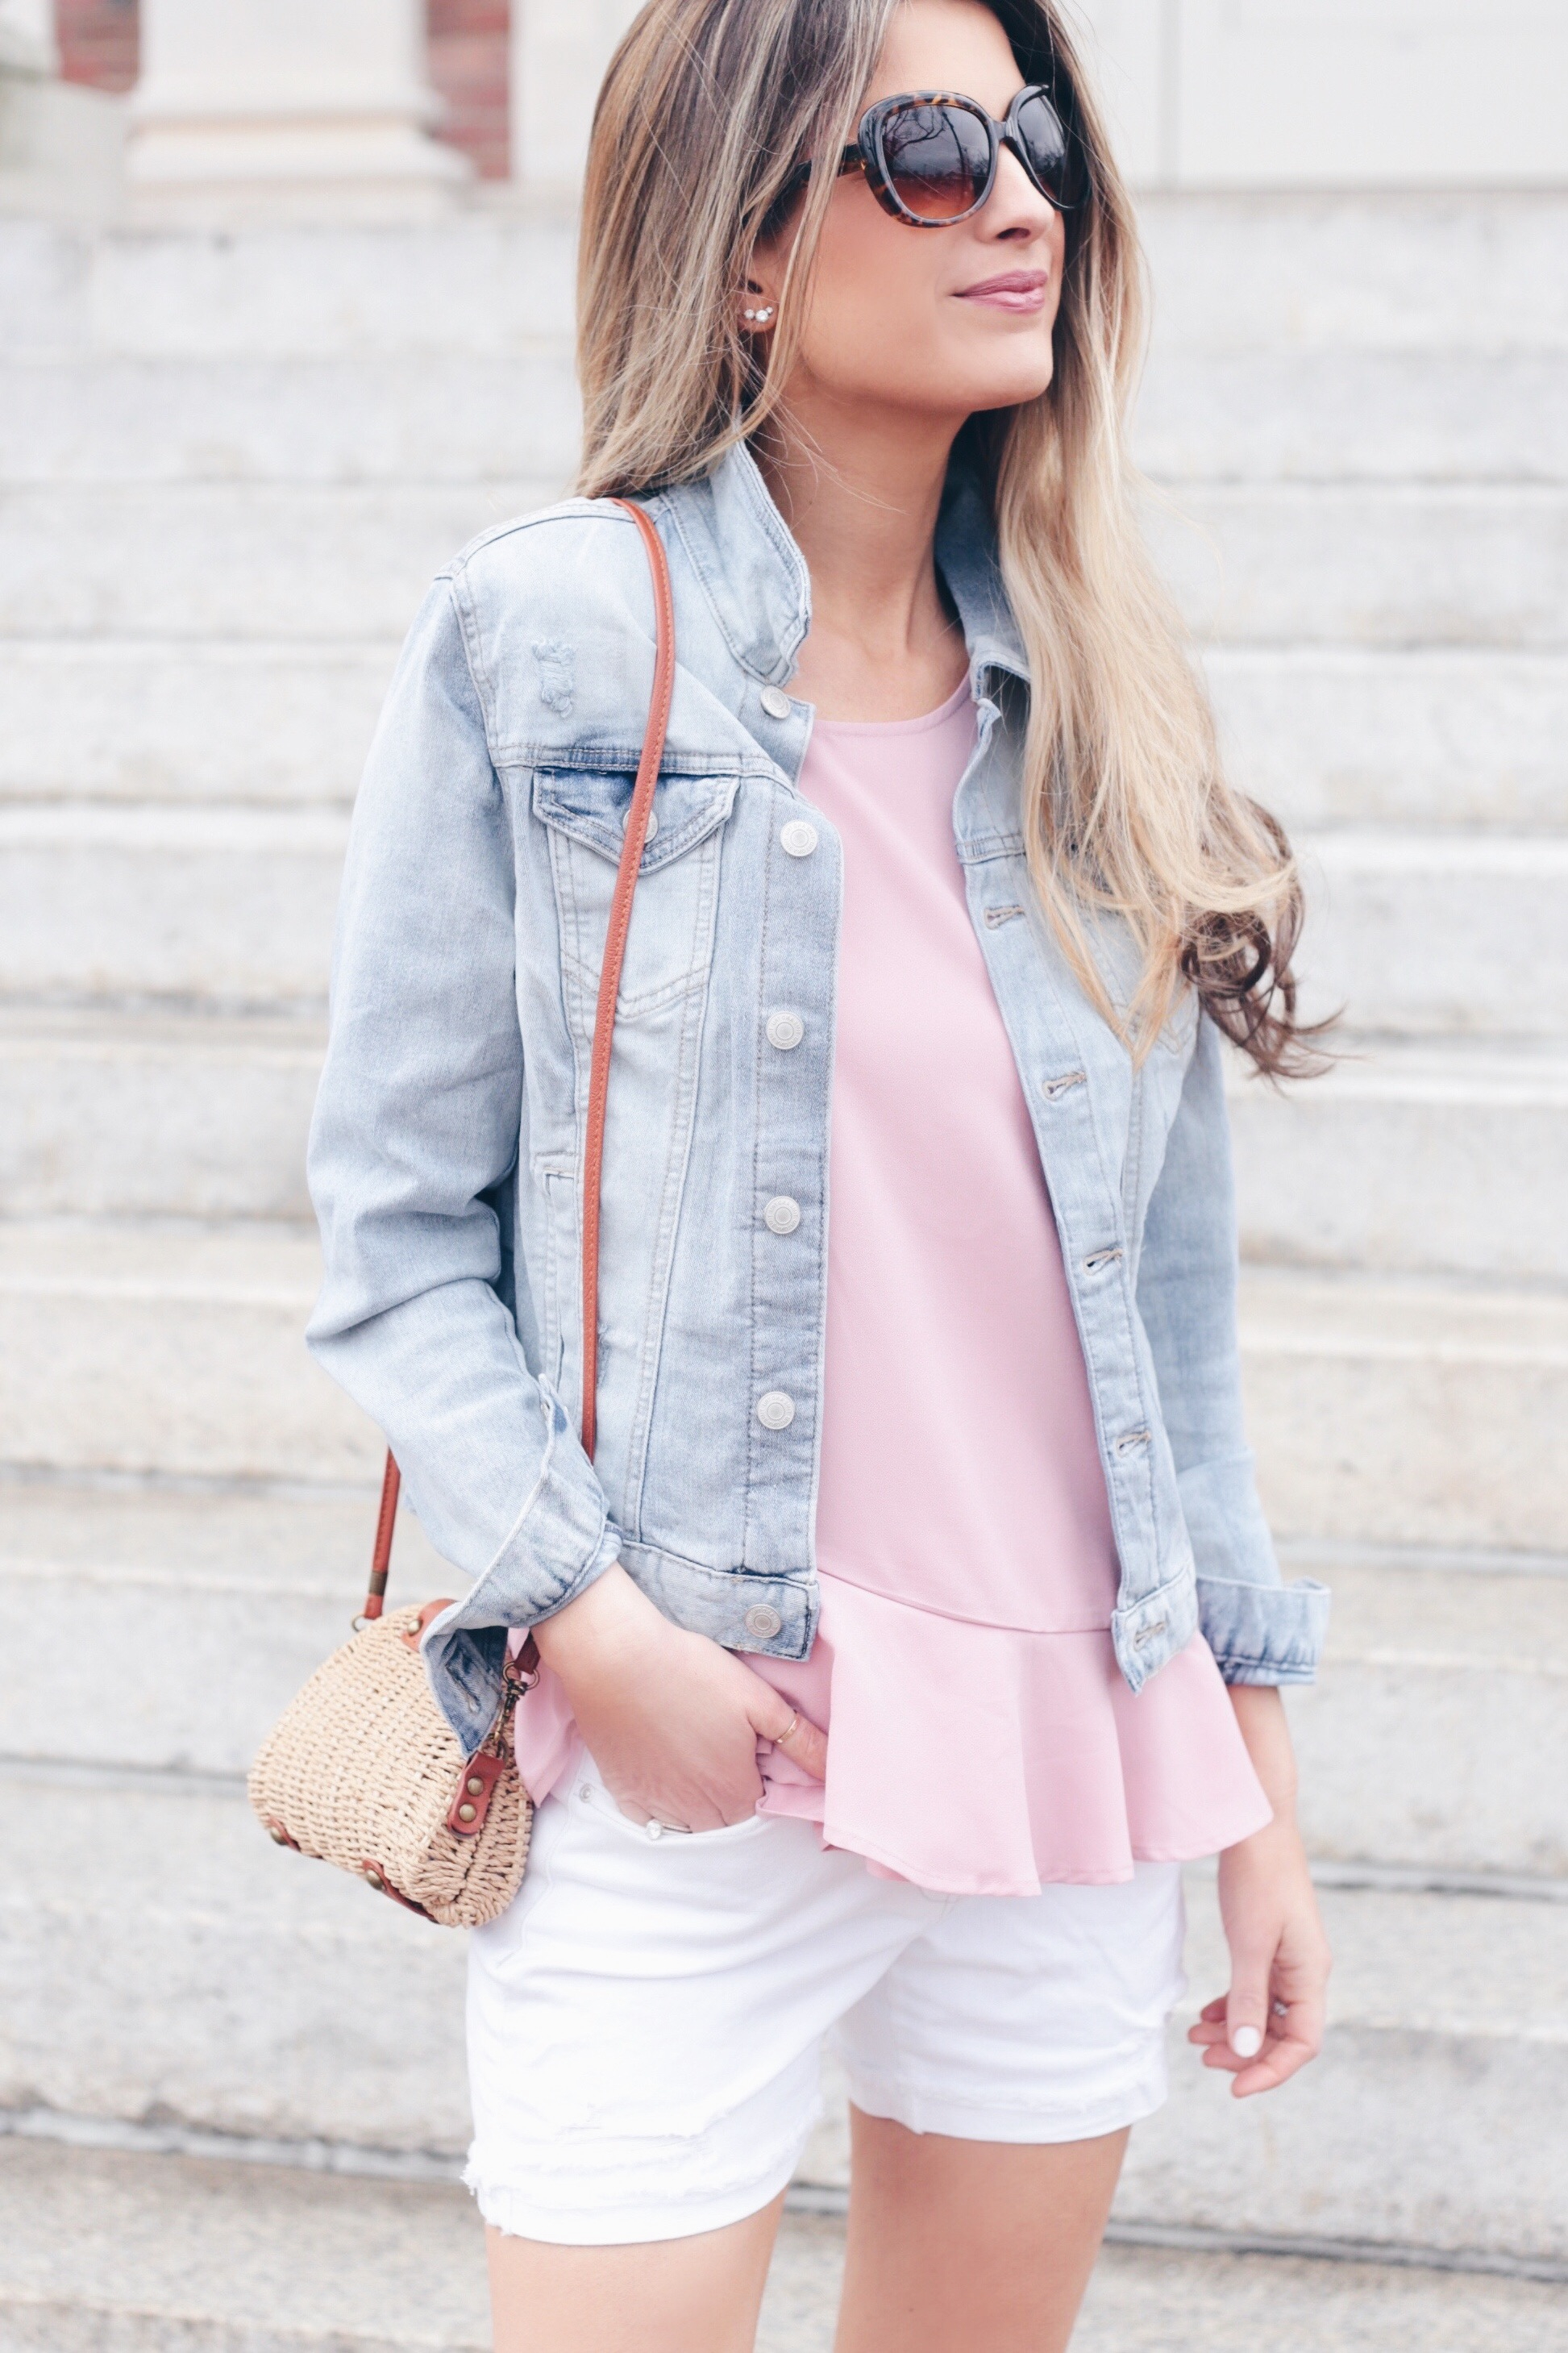 Spring Date Night Outfit Ideas